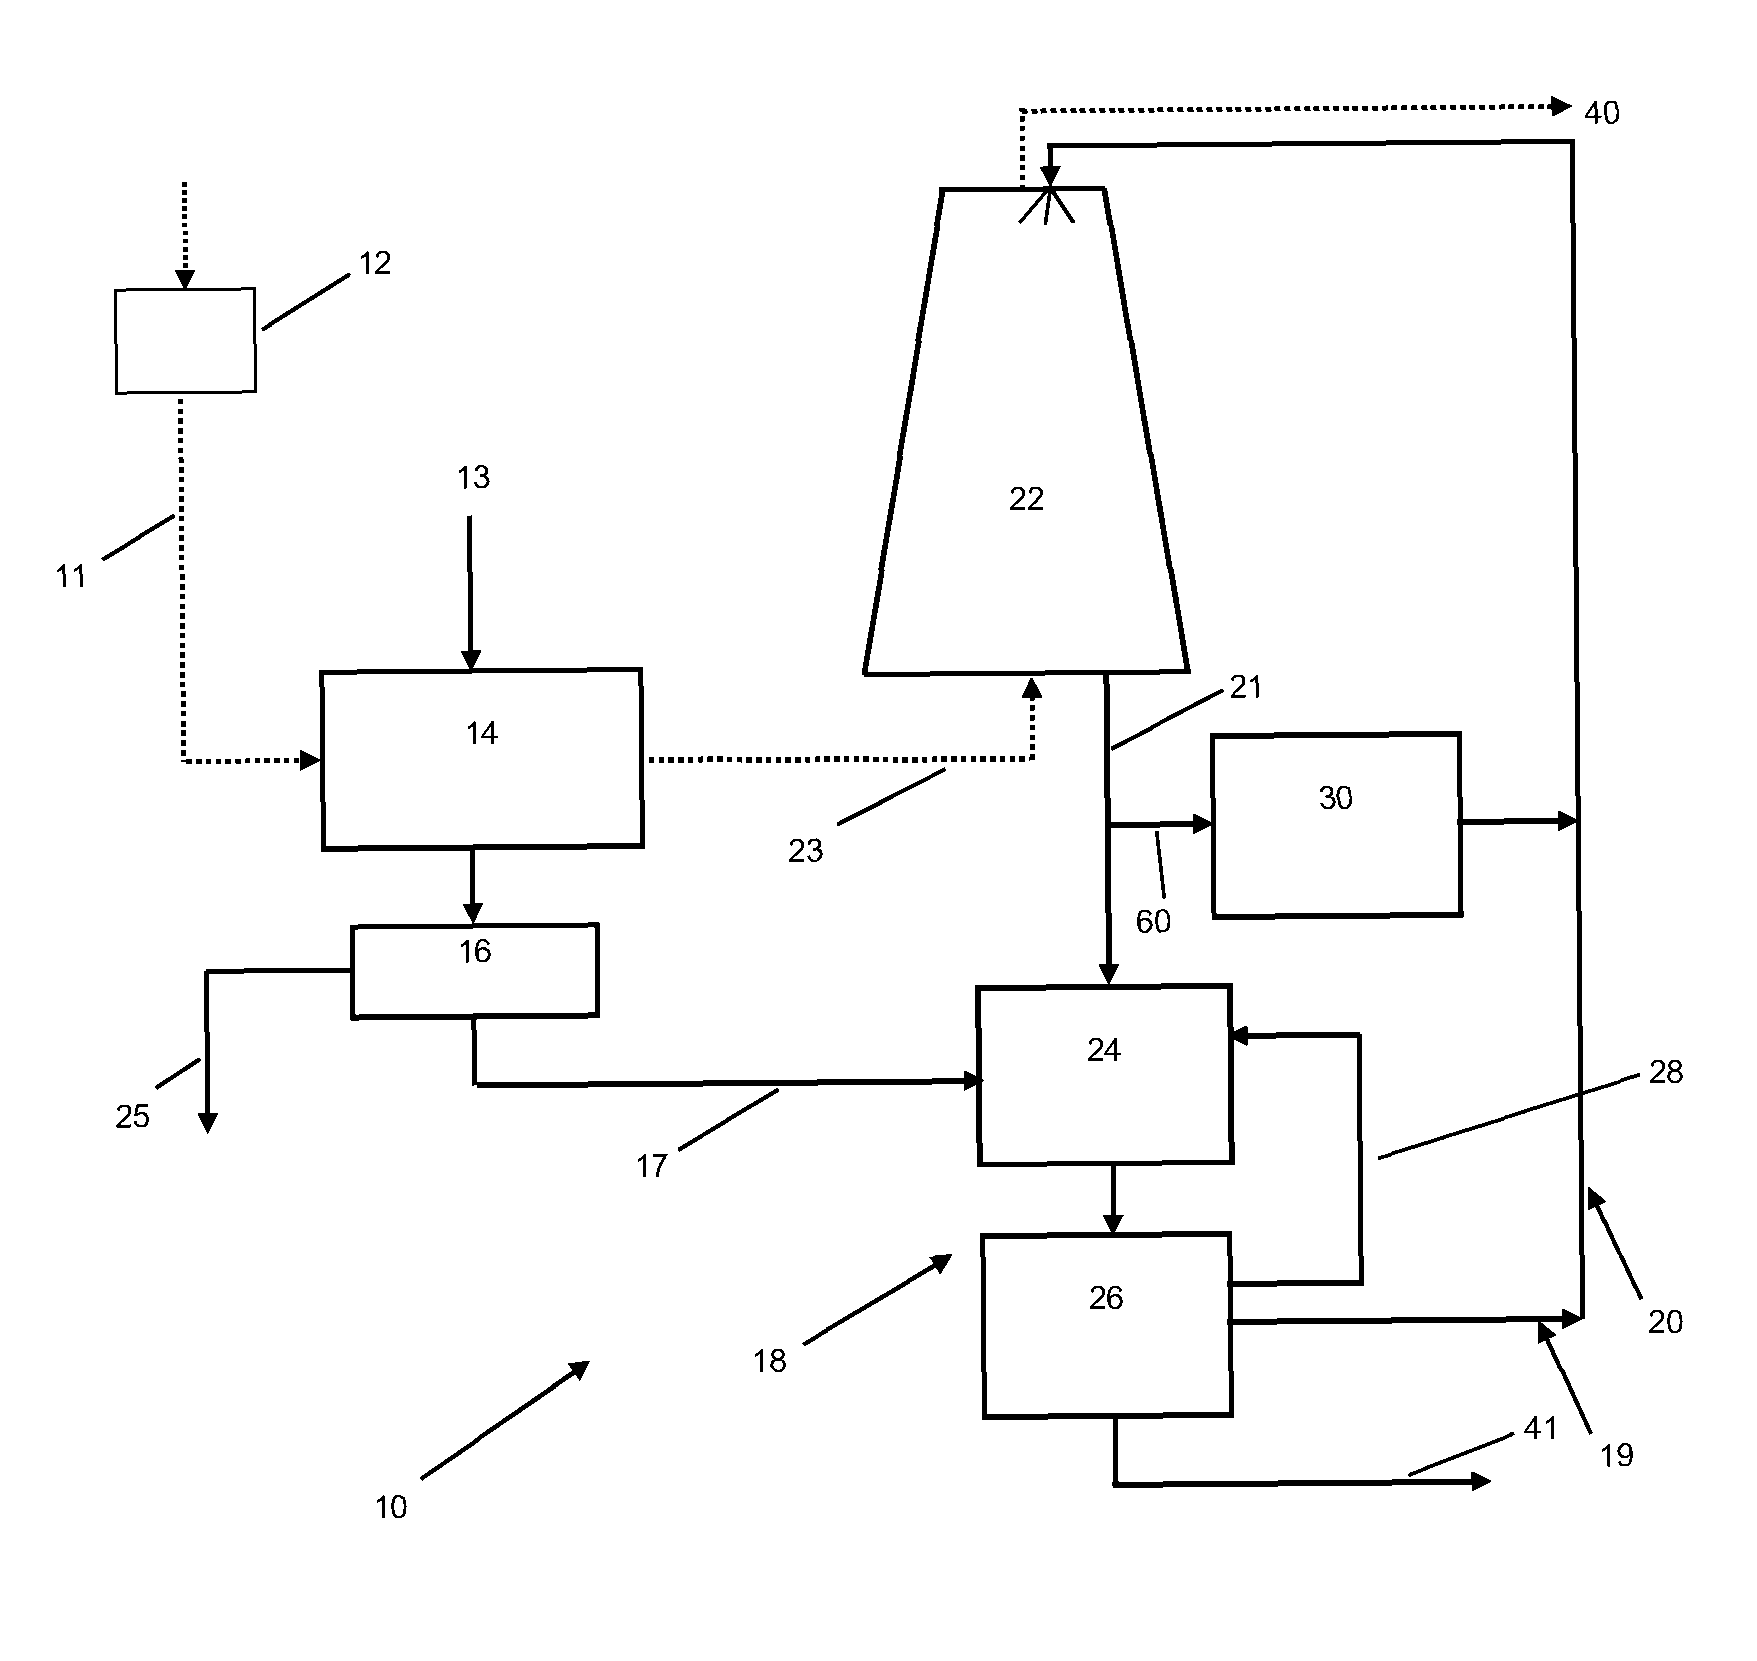 Method of treating a hot syngas stream for conversion to chemical products by removing ammonia and COS